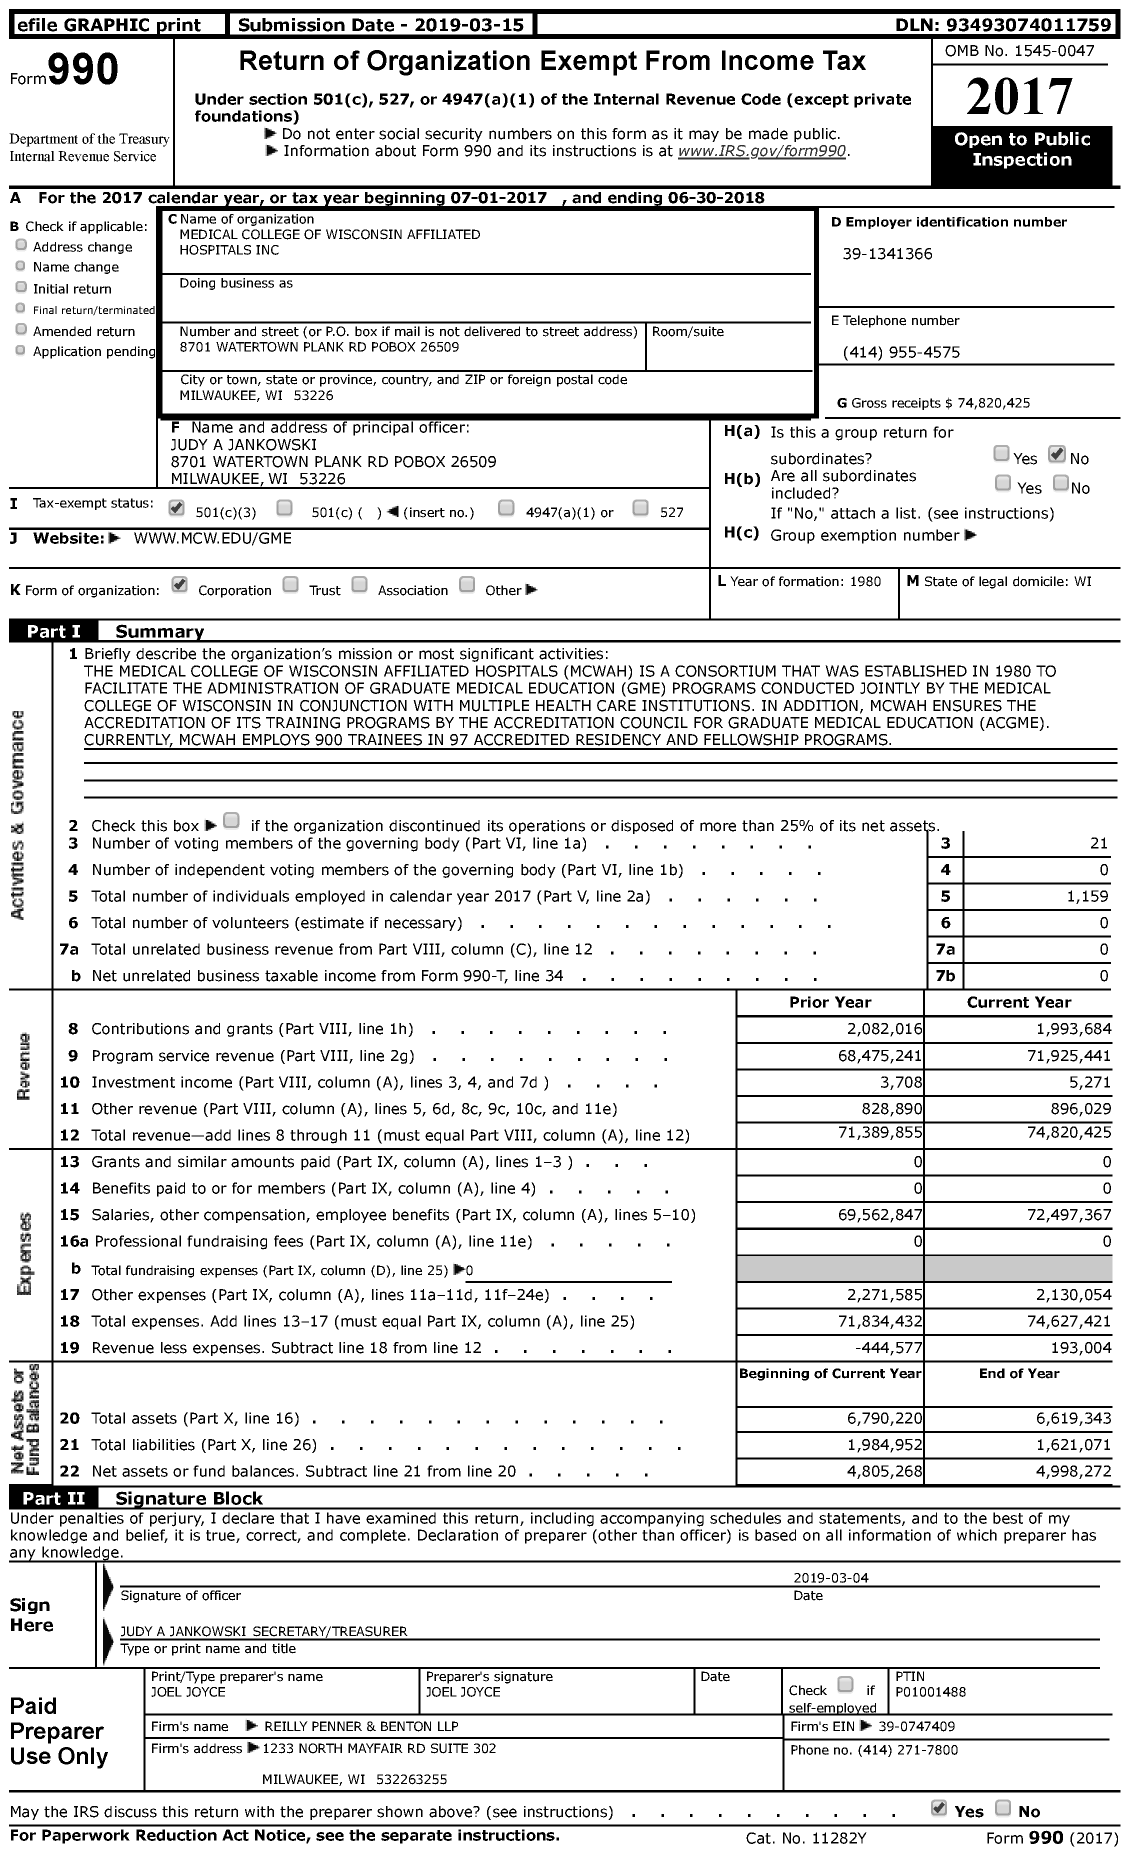 Image of first page of 2017 Form 990 for Medical College of WISCONSIN (MCW)